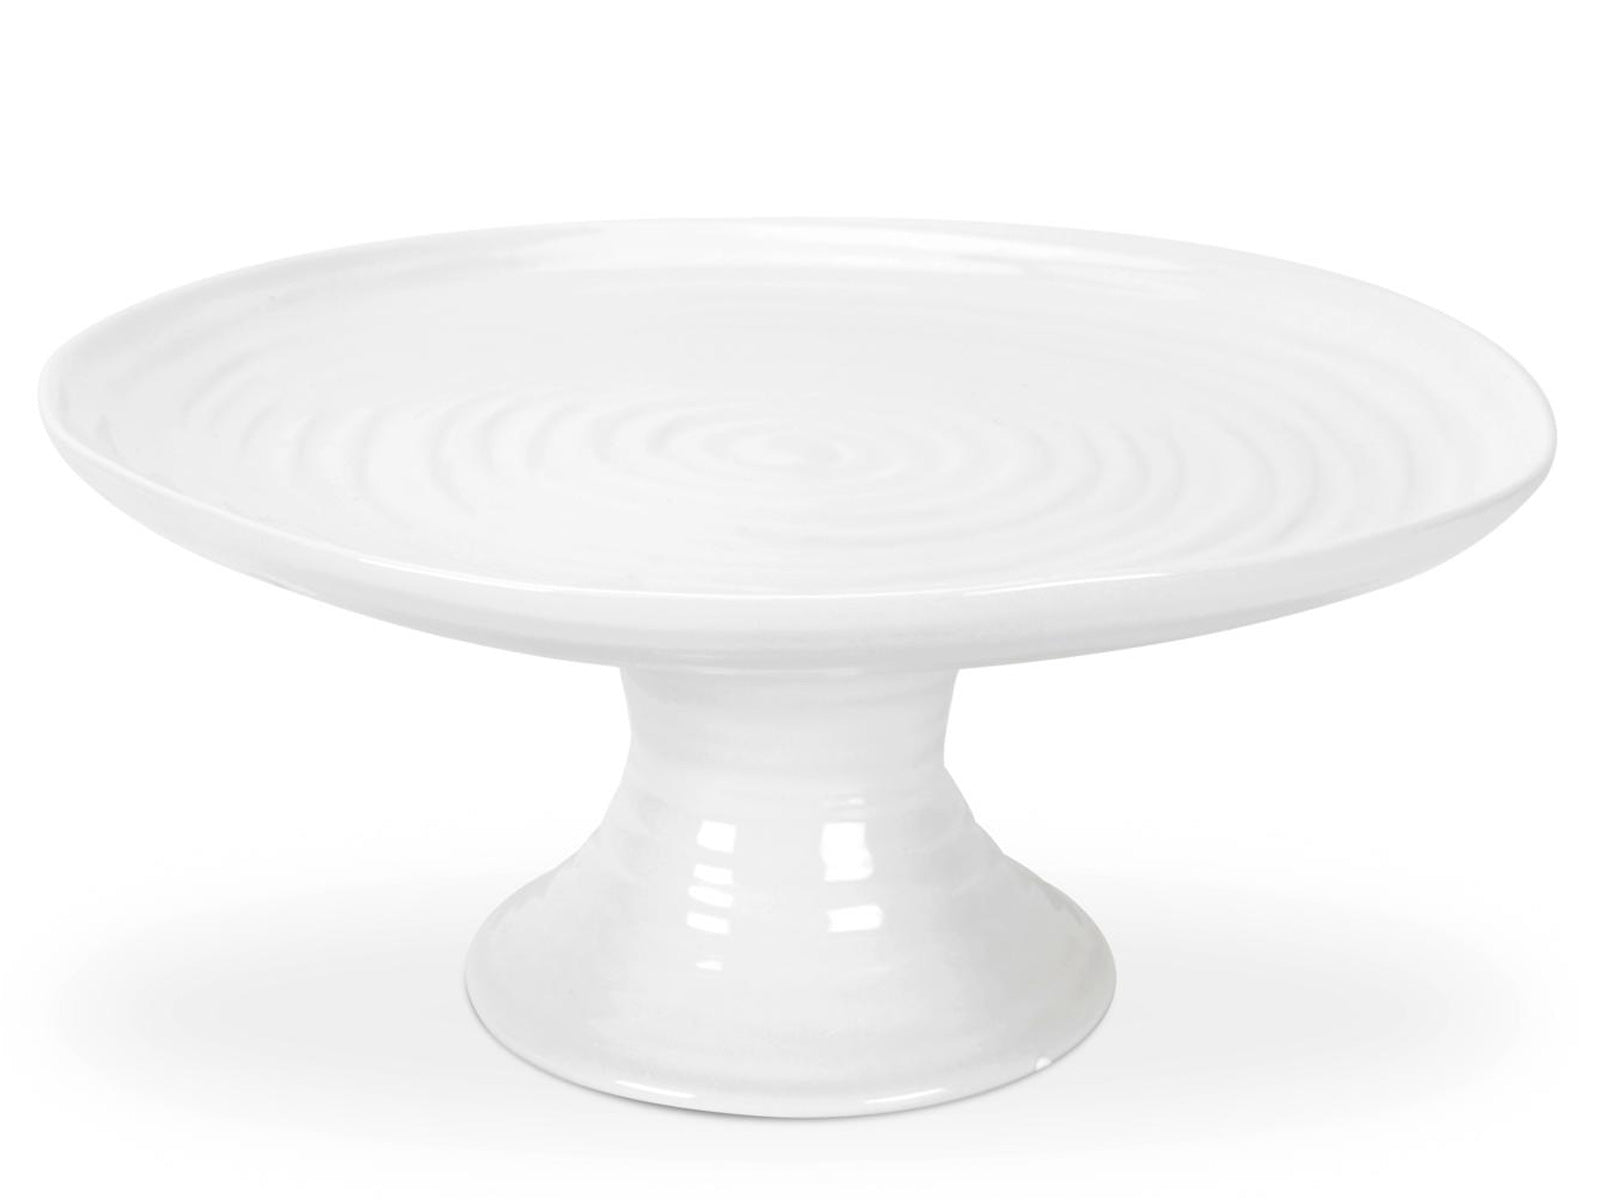 A white porcelain cake stand with a tall foot and rippled texture